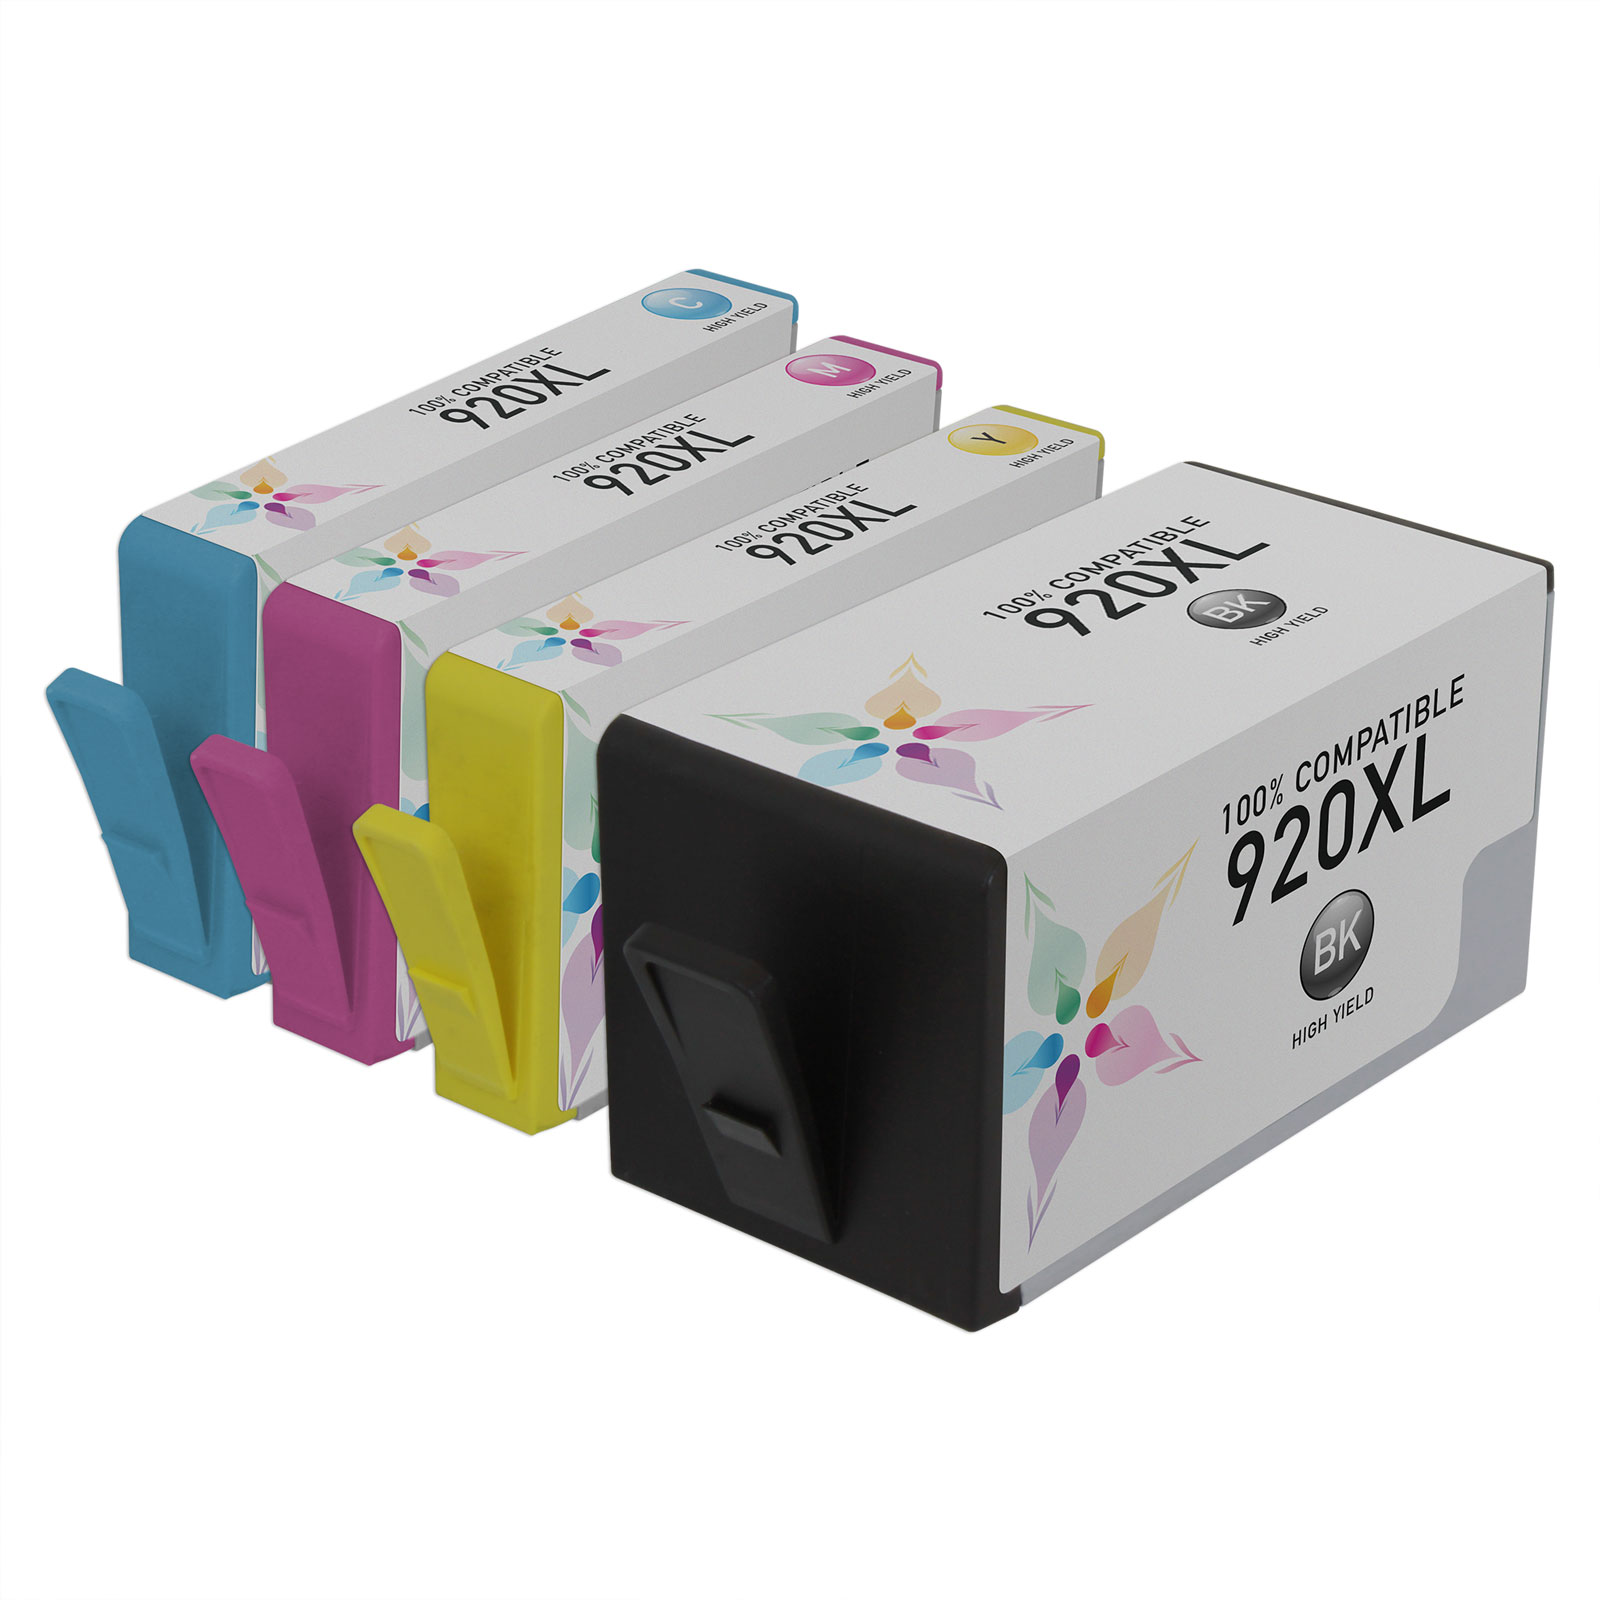 HP 920XL Ink -  LD Products, CD975AN